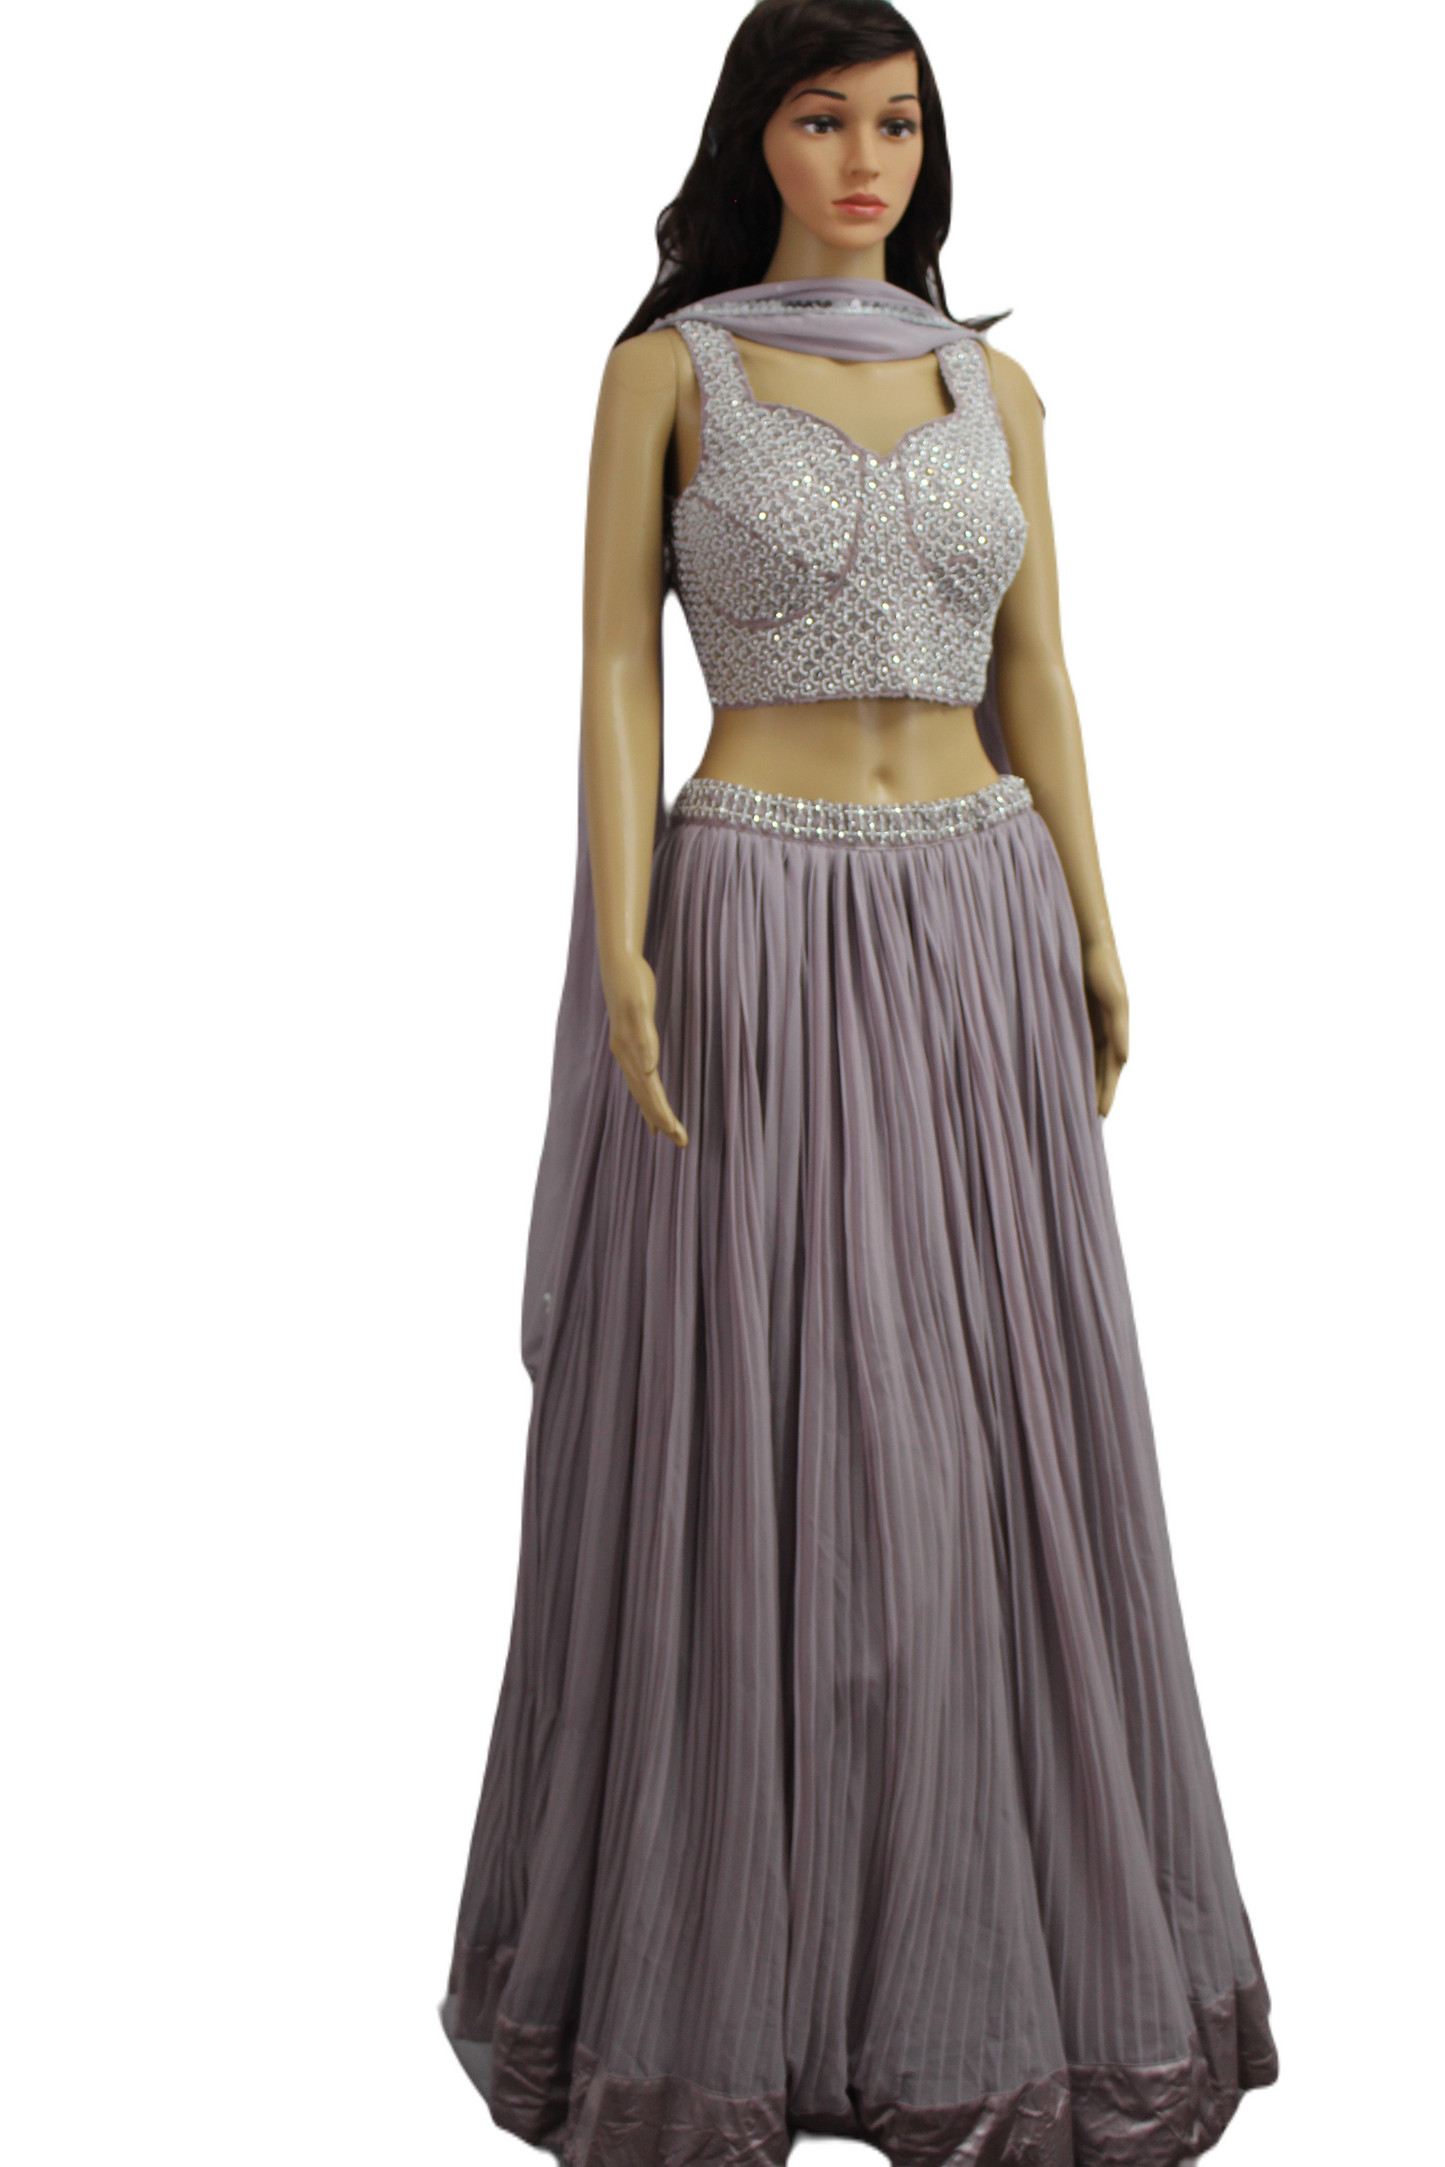 Mauve Shaded Handworked Fusion Crop Top with Exquisite Georgette Skirt